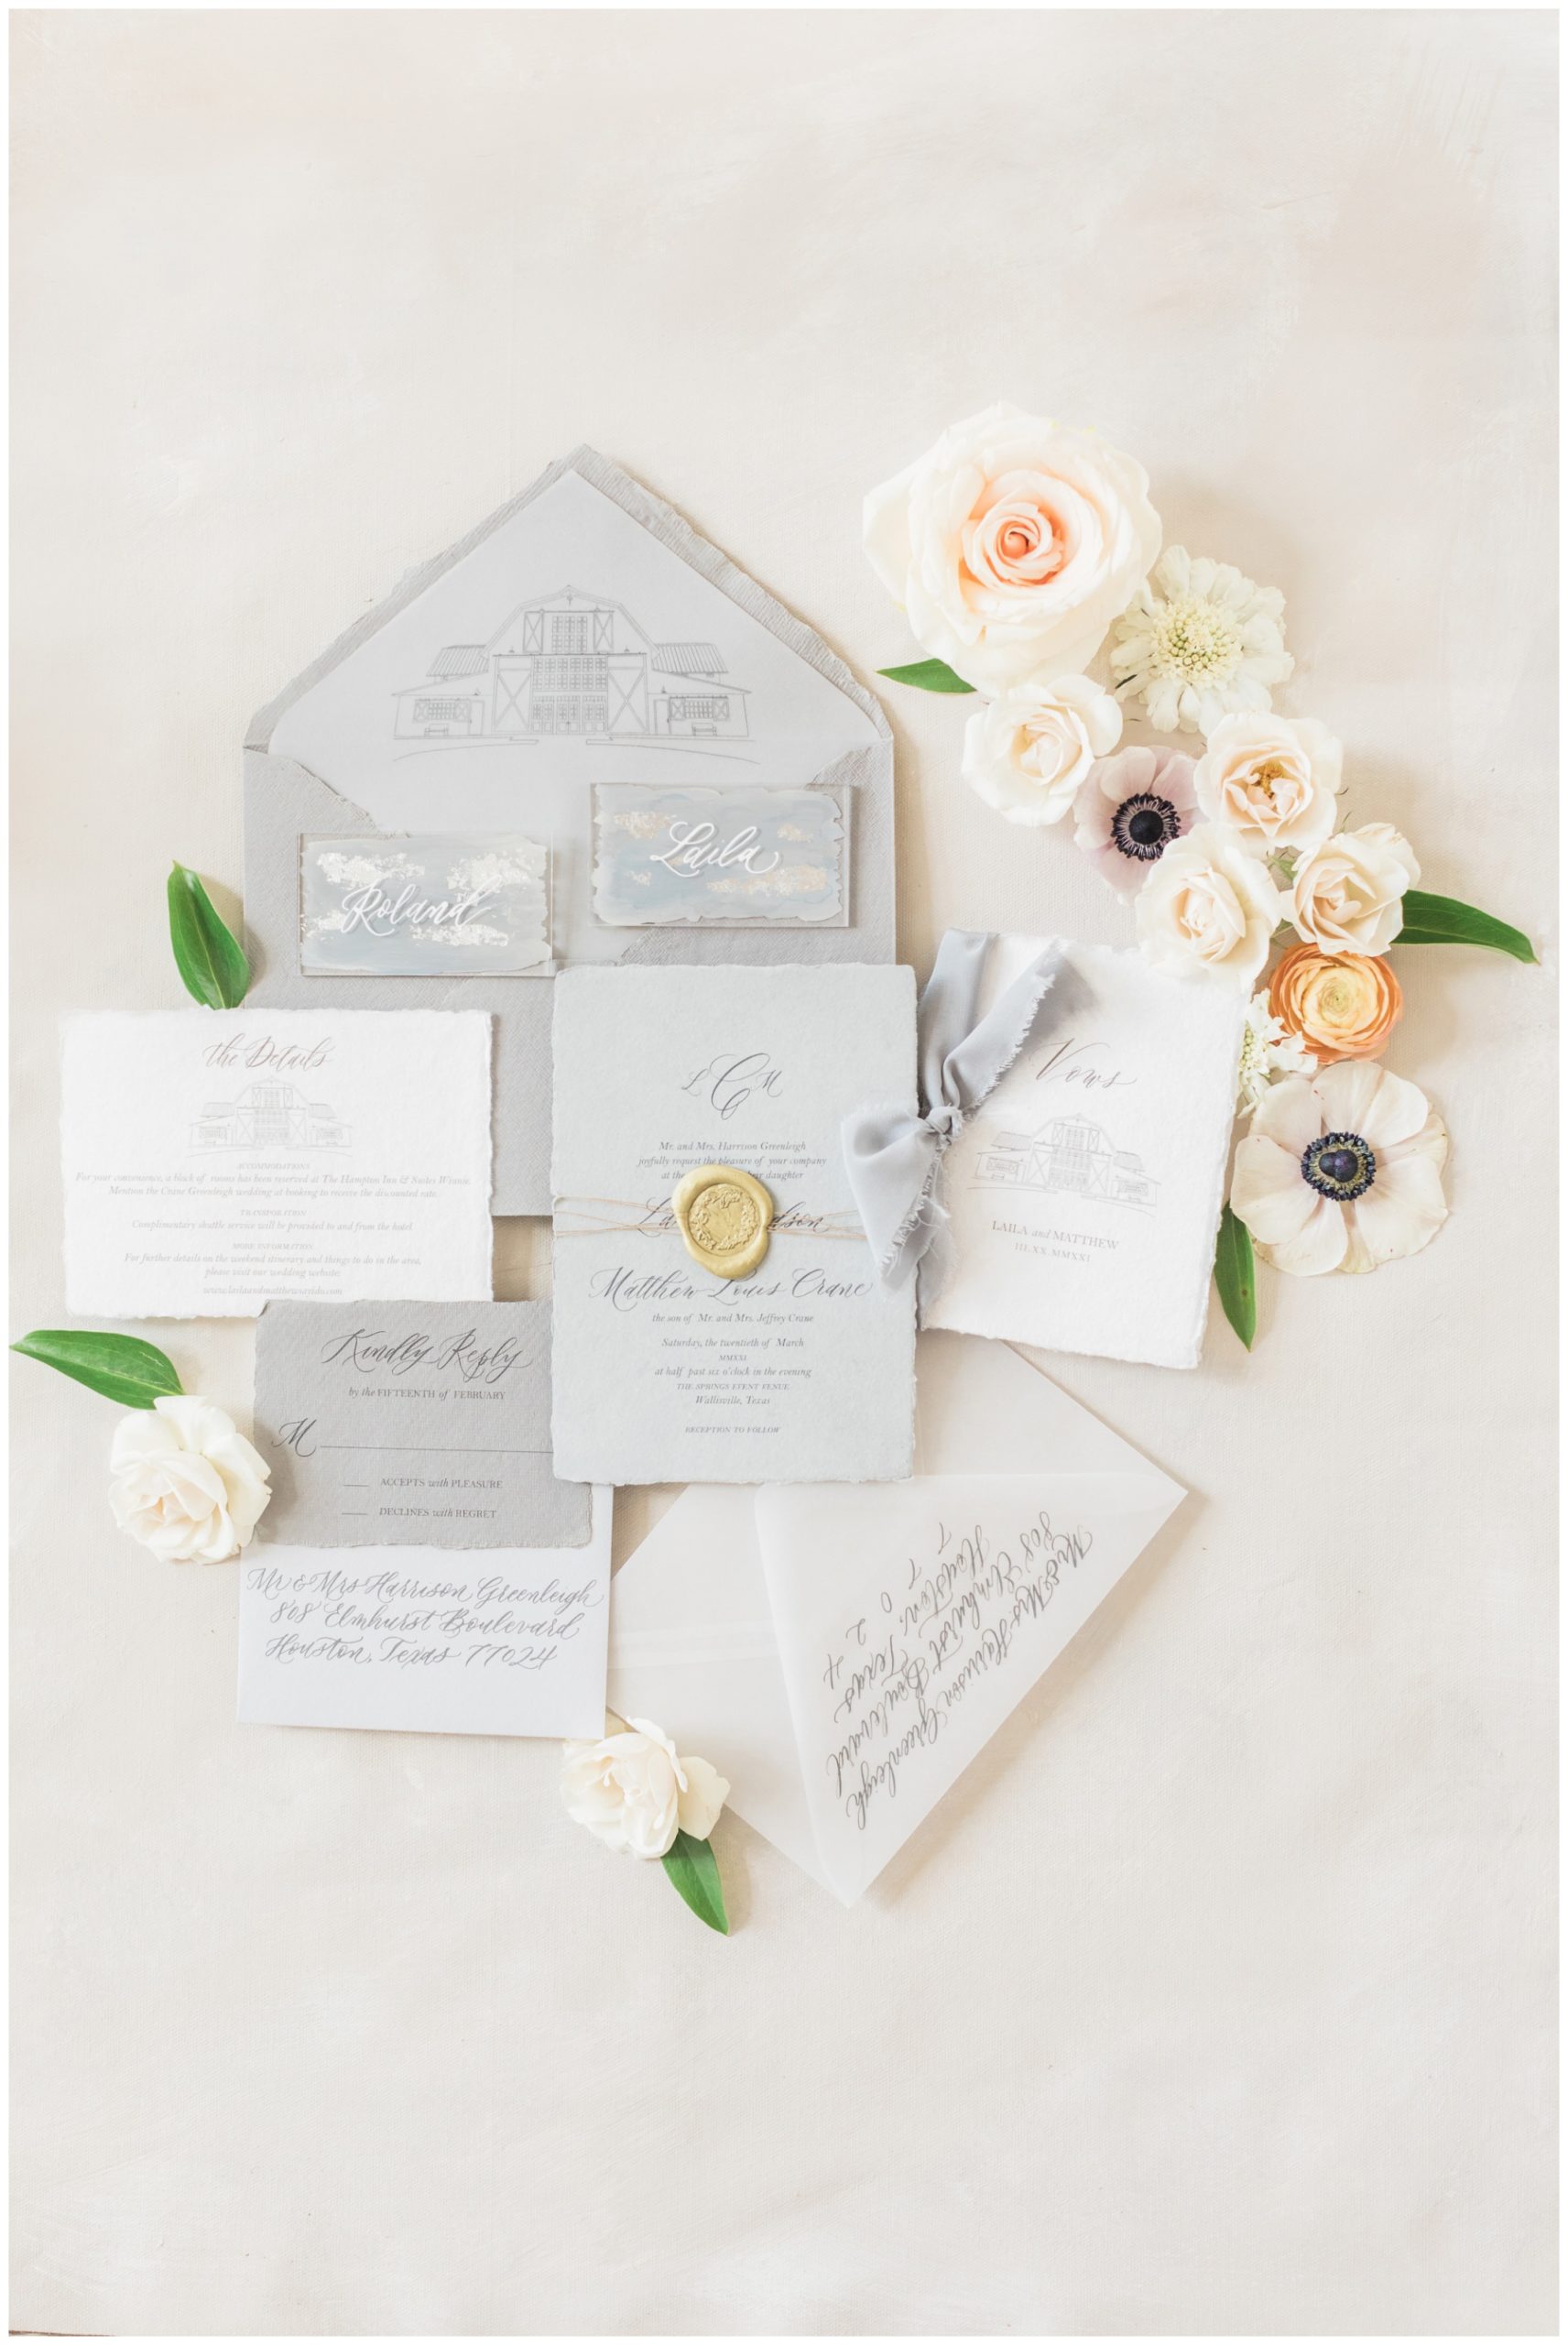 Gray deckle-edge wedding stationery by Yellow Rose Calligraphy